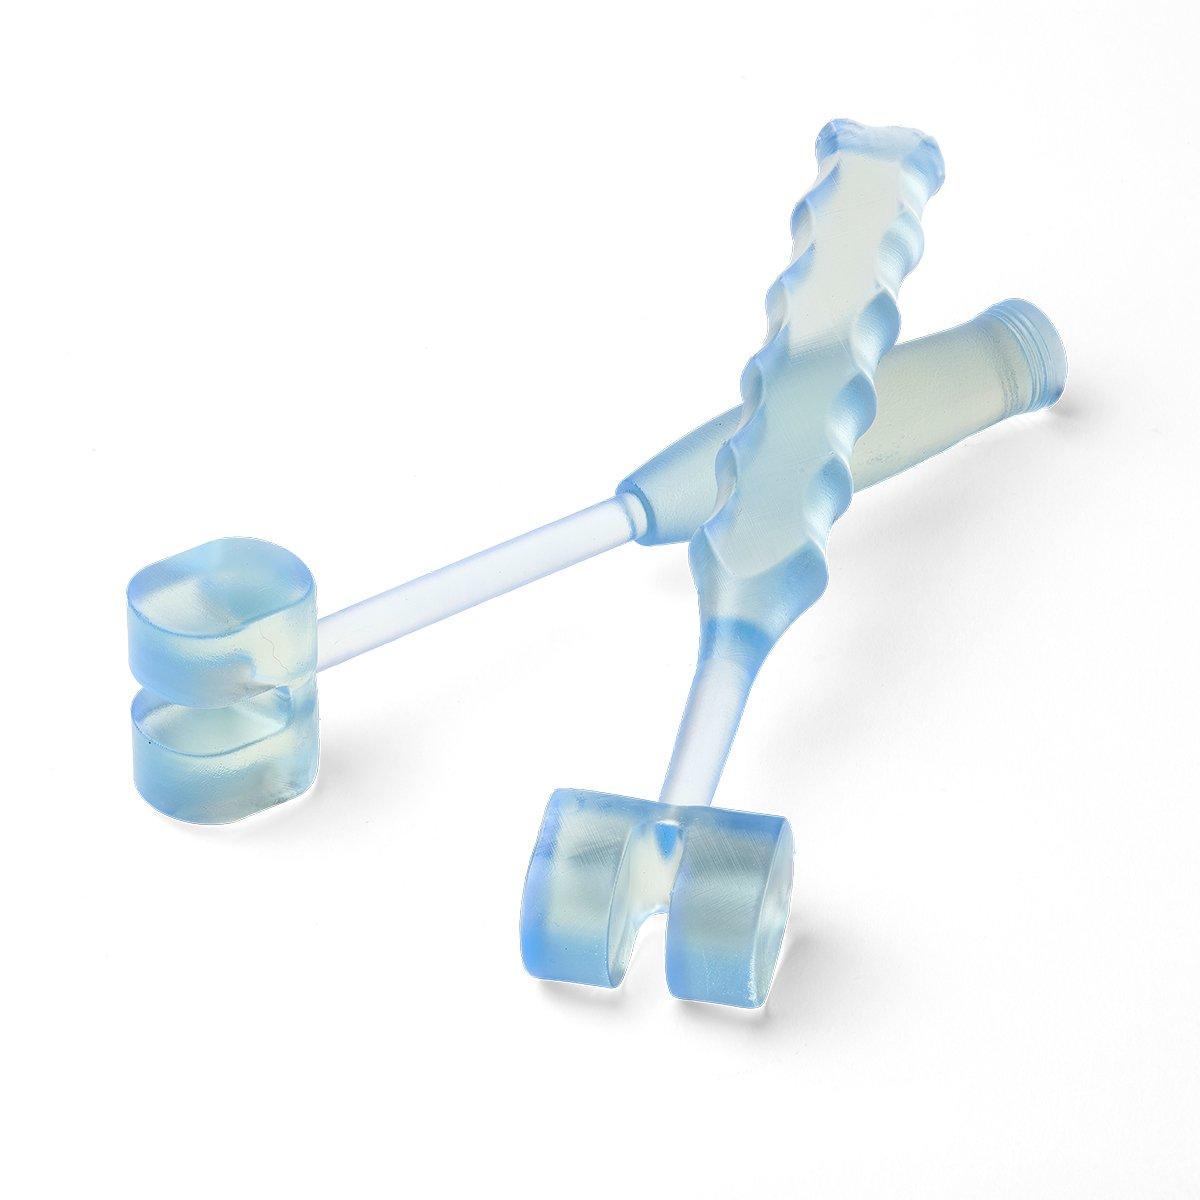 surgical instrument printed in BioMed Durable Resin